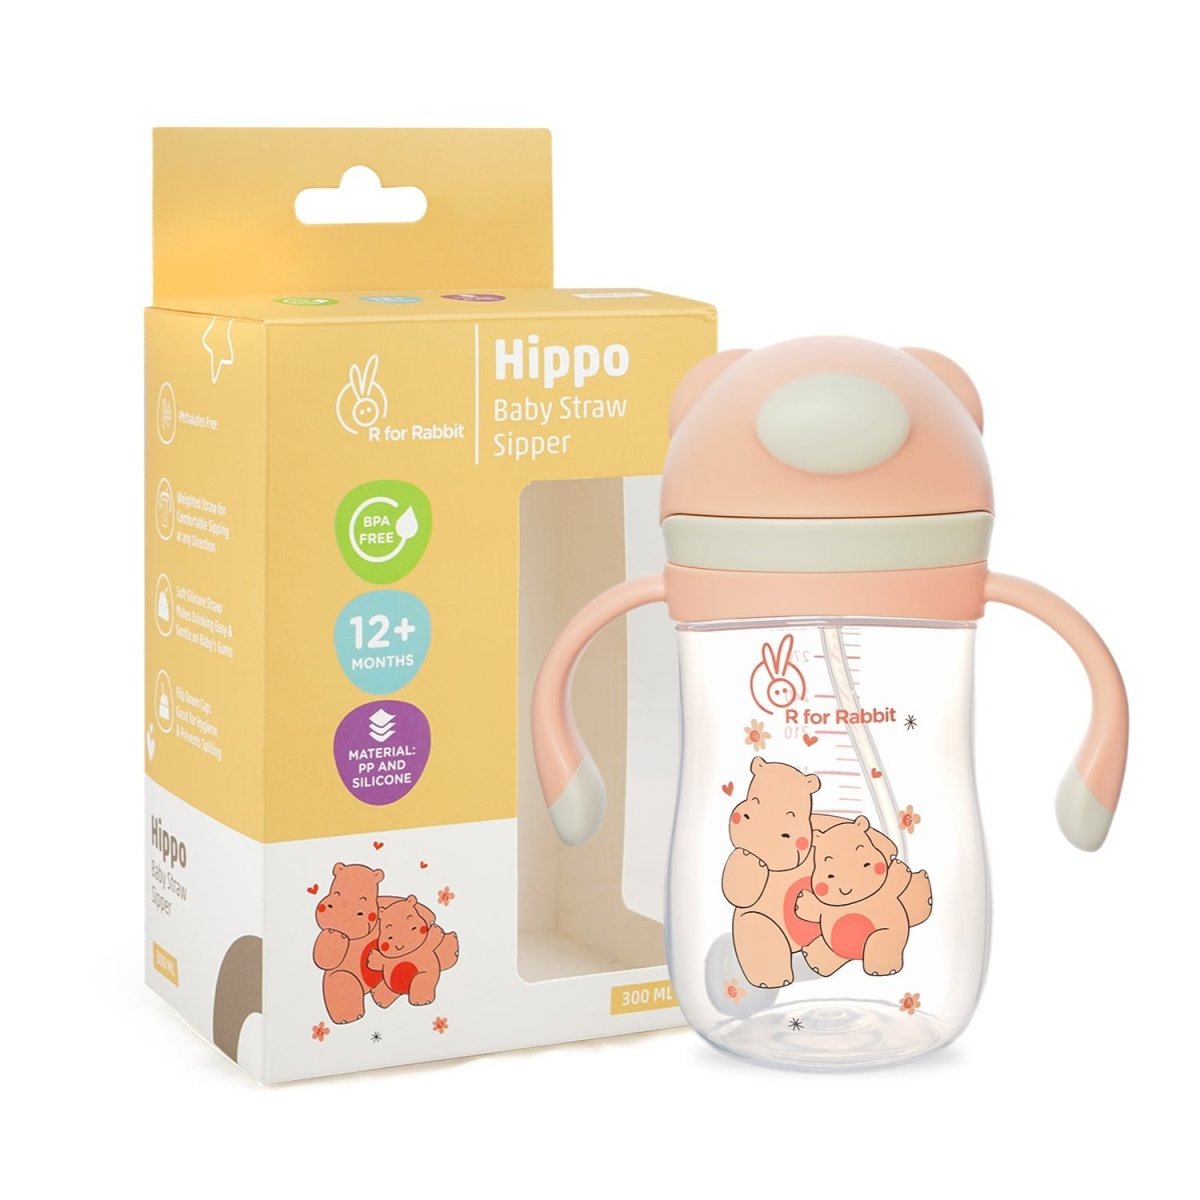 R for Rabbit Hippo Baby Straw Sipper- Yellow - SIHPY01